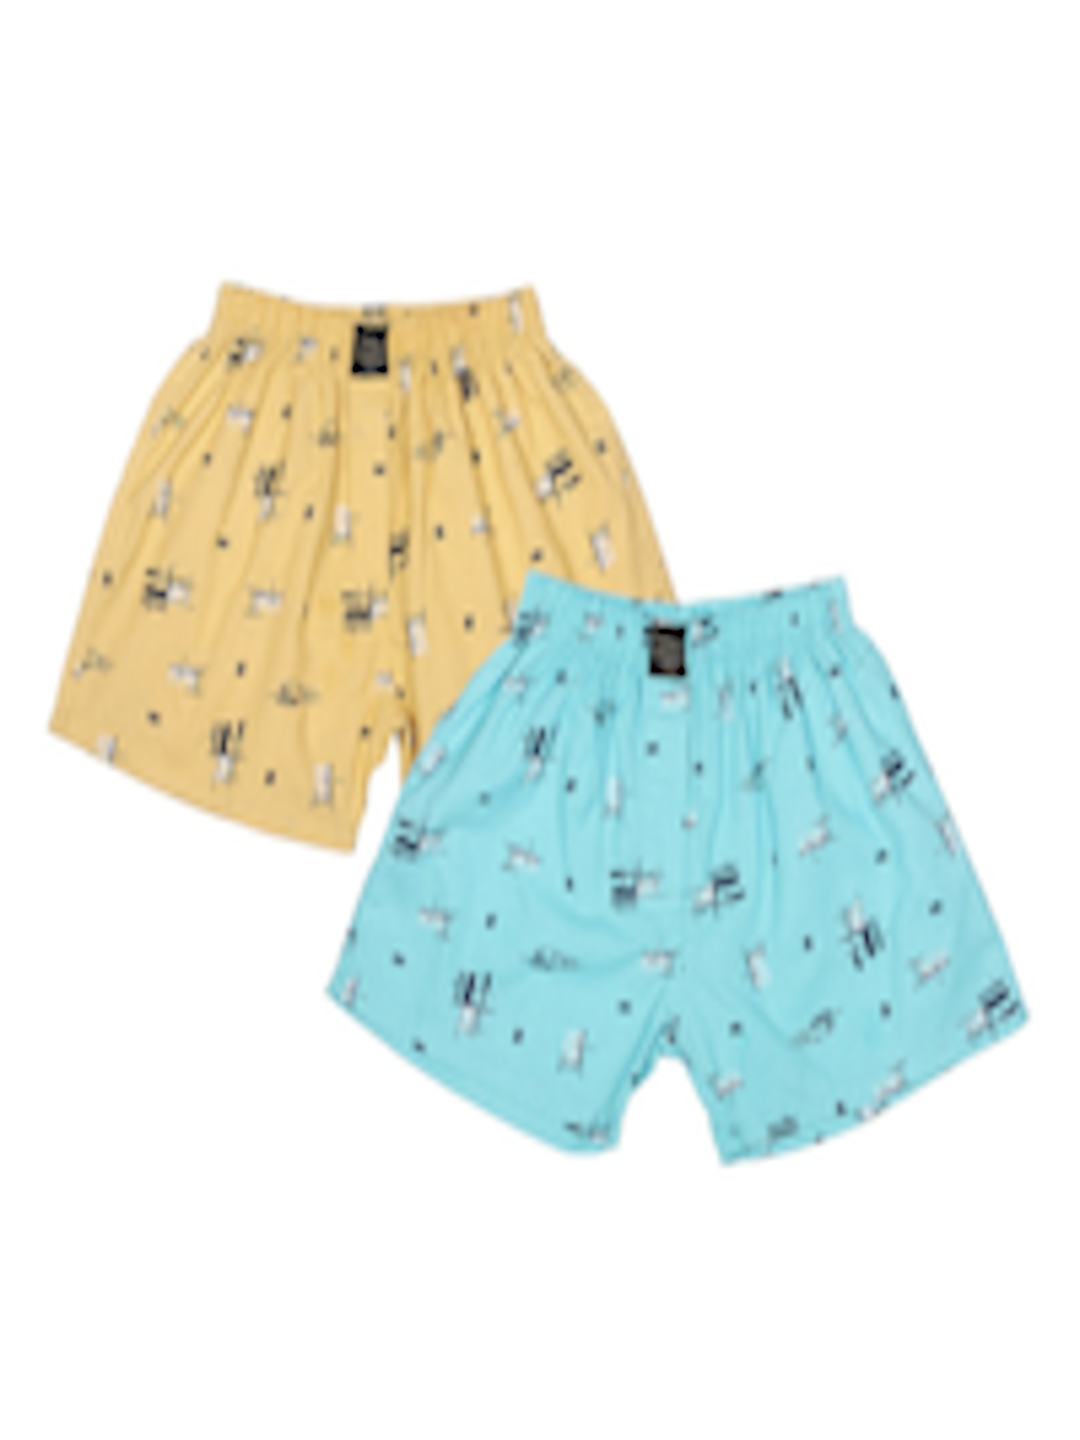 Buy CREMLIN CLOTHING Pack Of 2 Boys Blue And Yellow Printed Cotton ...